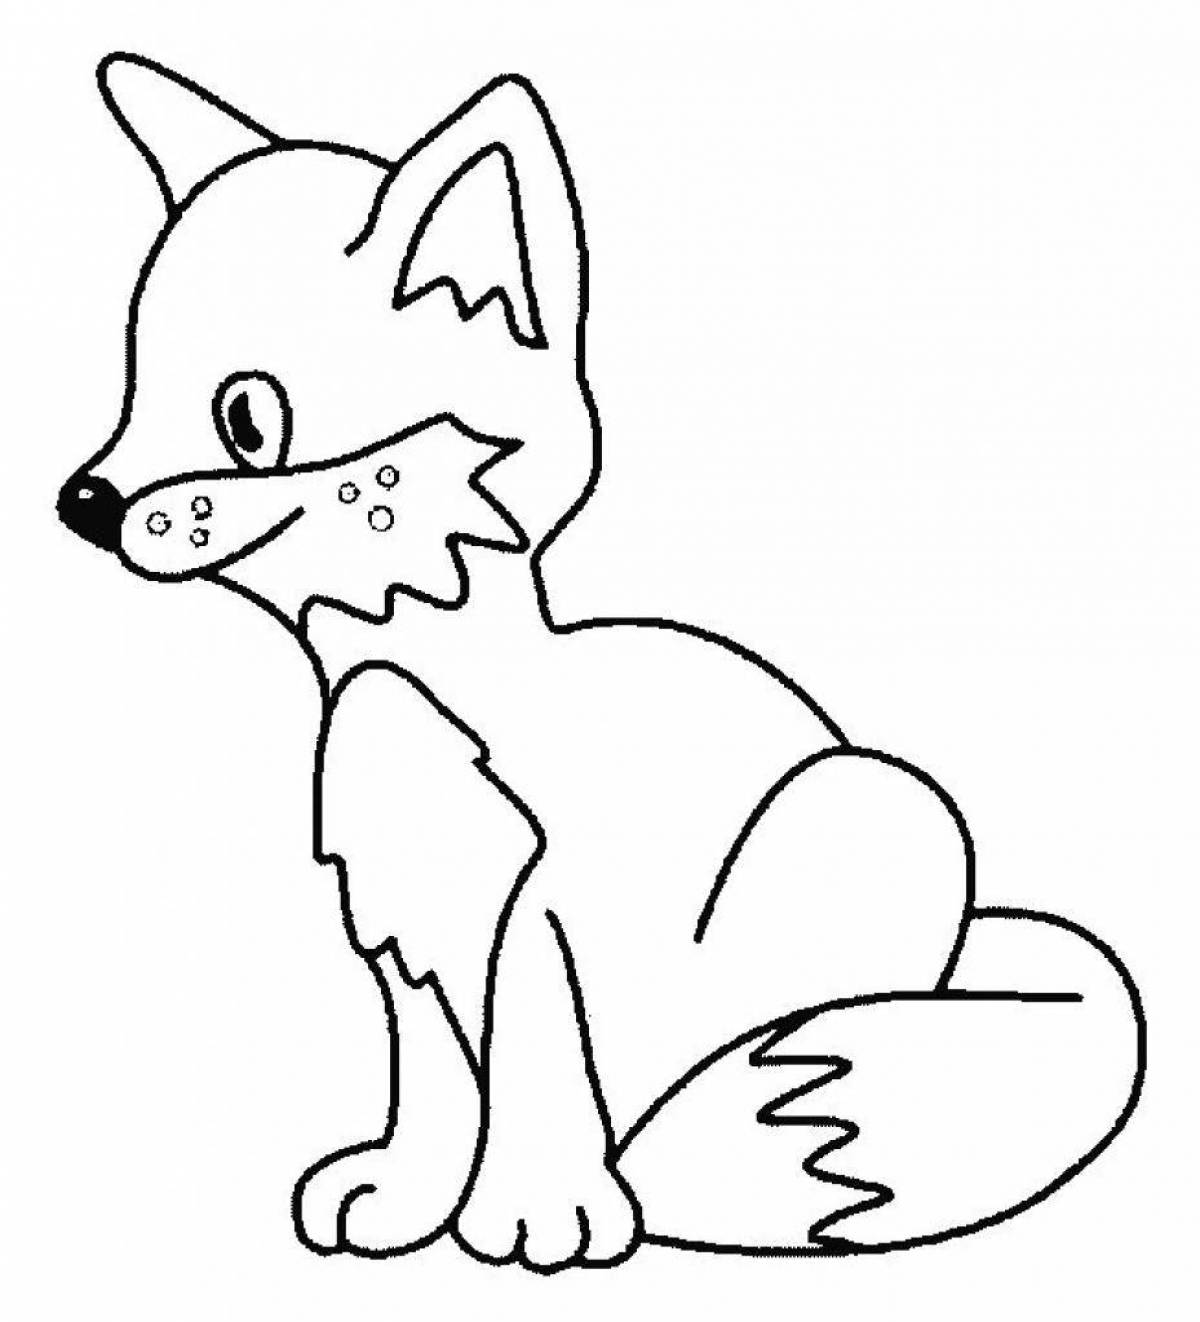 Adorable fox coloring book for kids 2-3 years old